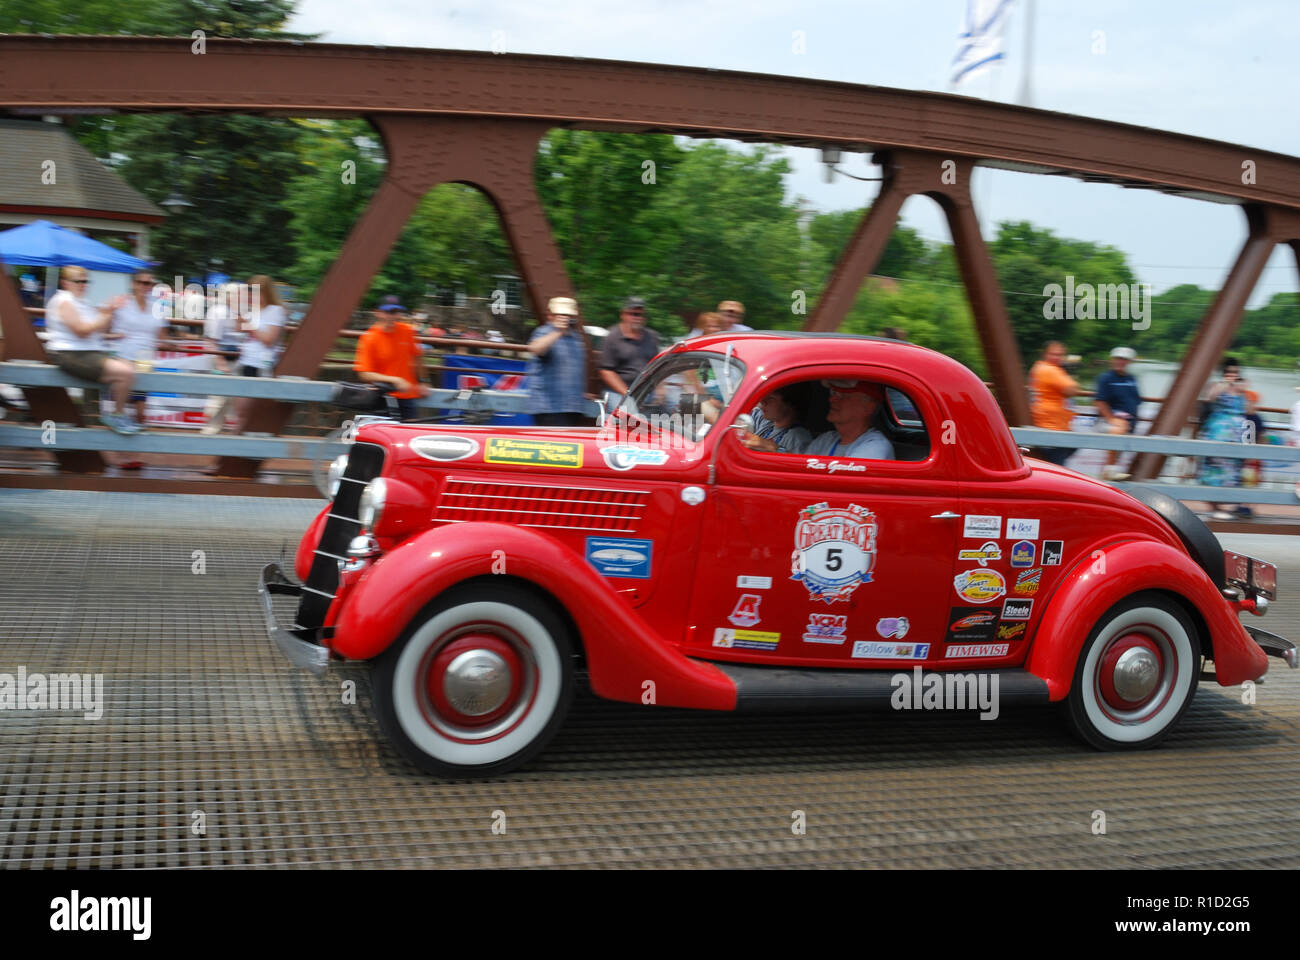 Drivers complete one lap of race in Fairport NY... Stock Photo